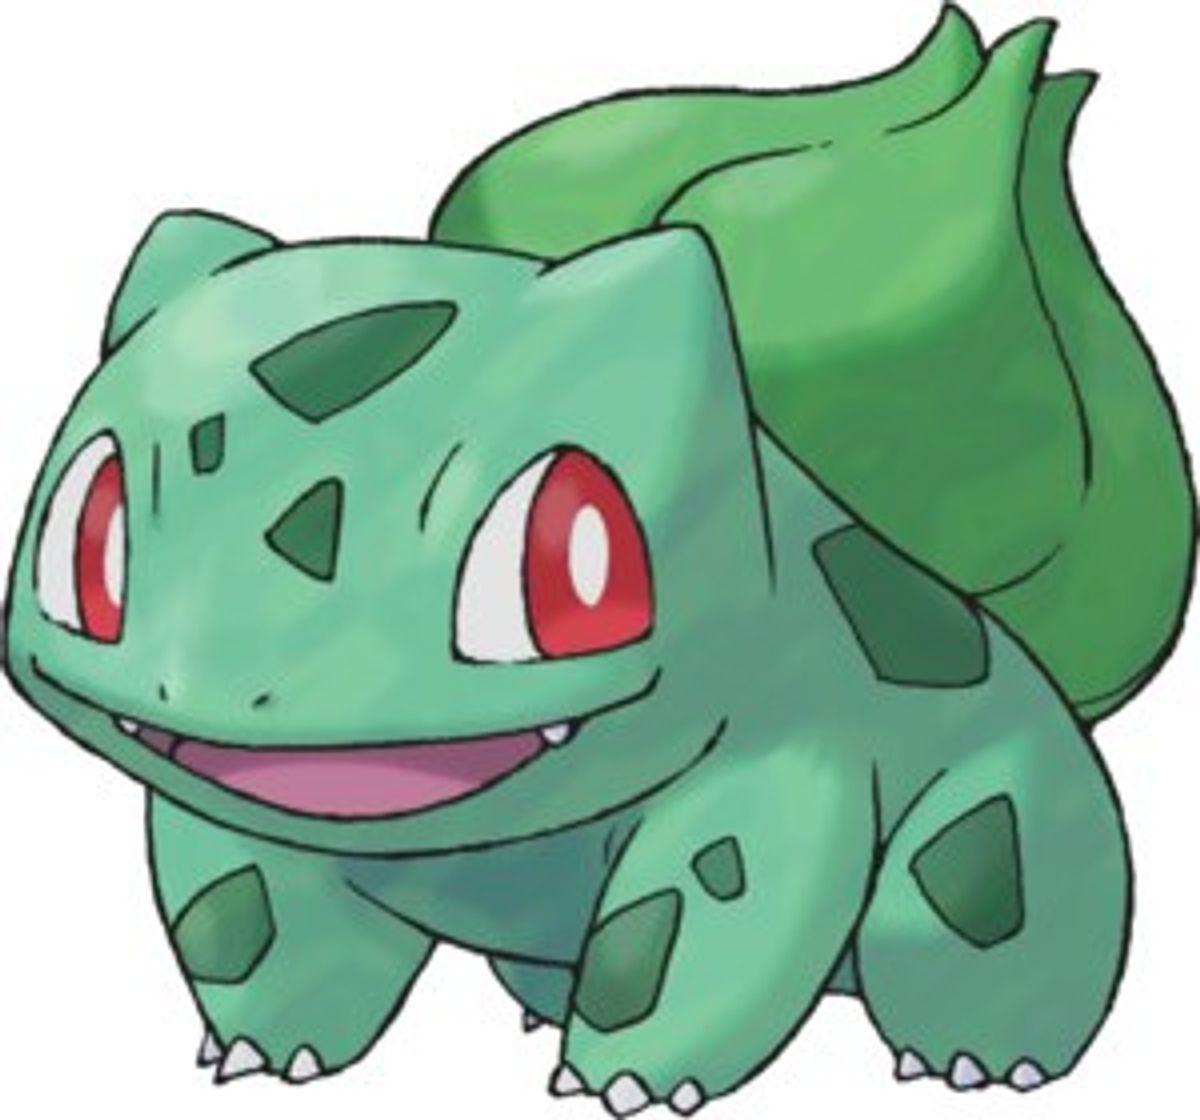 Bulbasaur: The One That No One Ever Expected